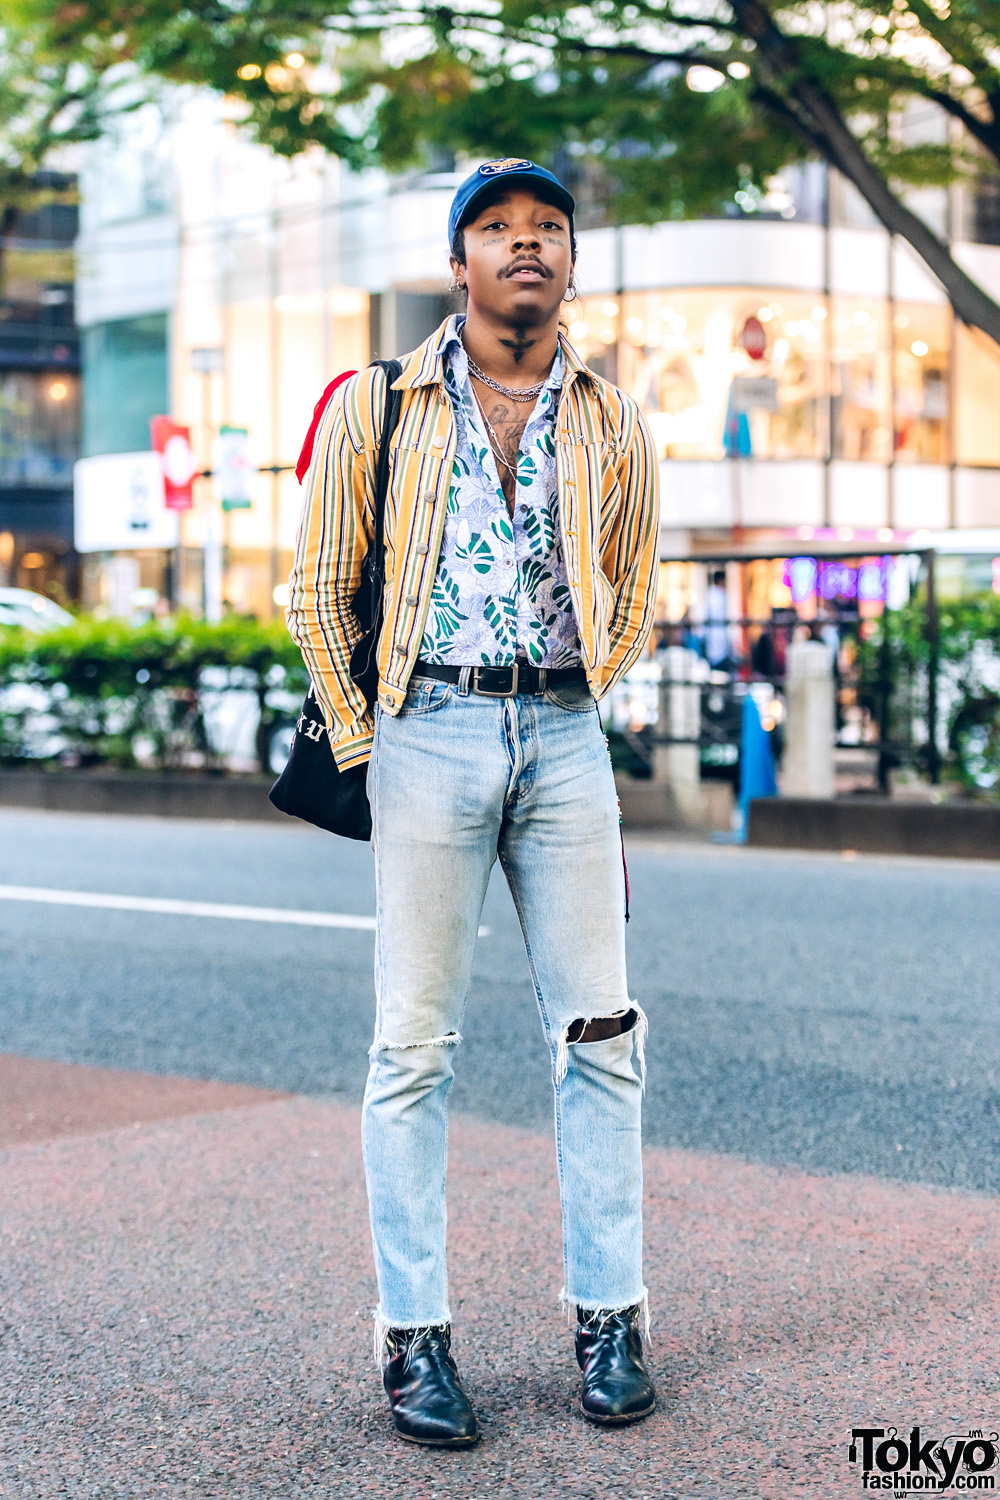 Tokyo-Based Designer in Ripped Jeans & Mixed Prints Streetwear